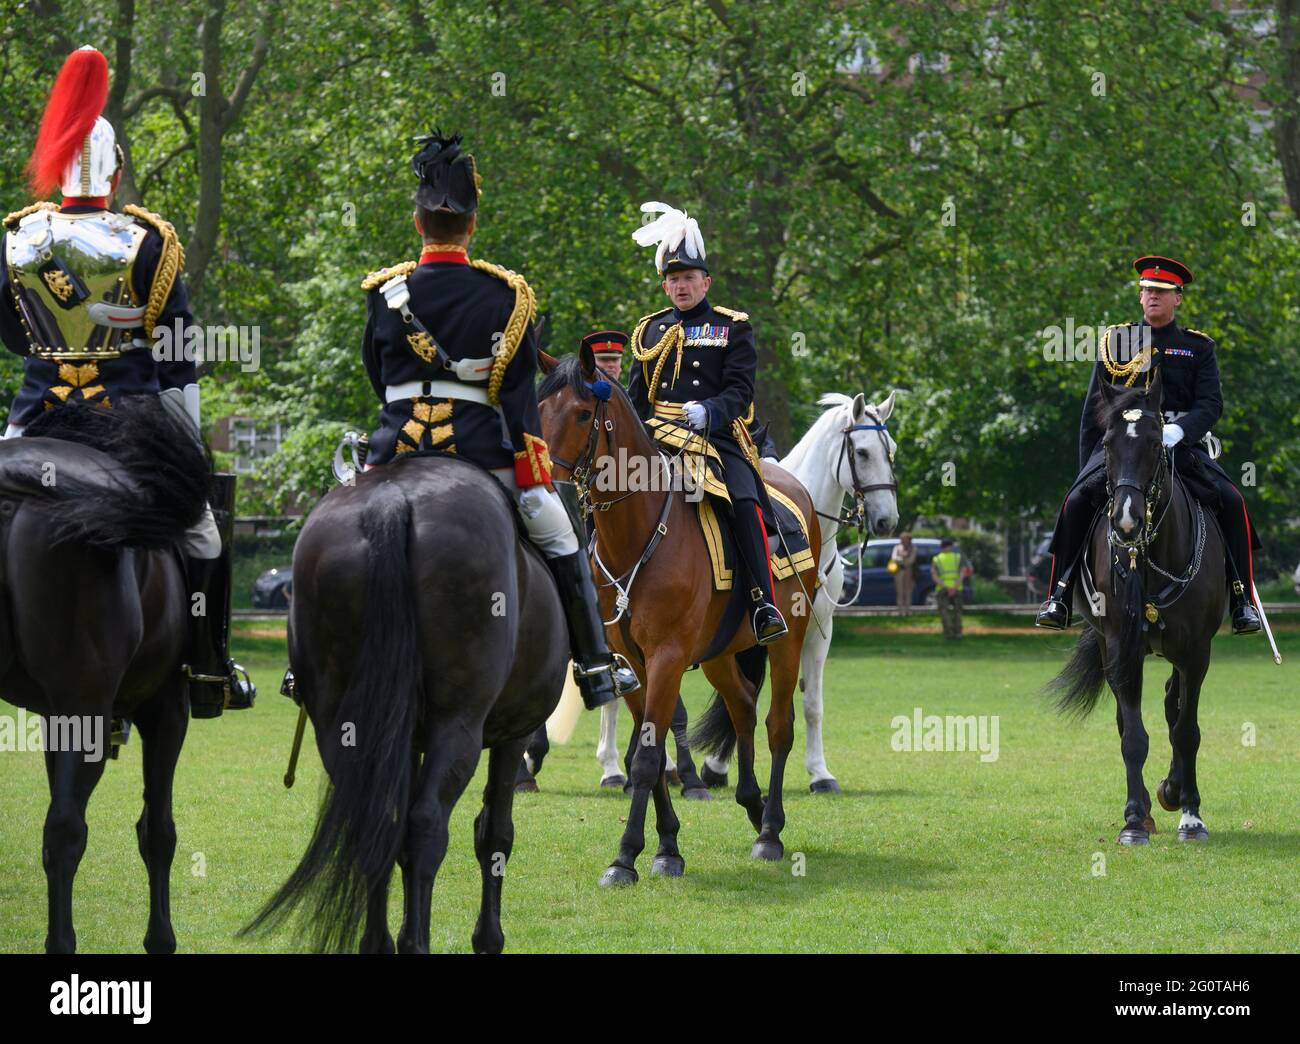 London, UK. 3 June 2021. 2021 Annual inspection of the Household Cavalry at Hyde Park by Major General Christopher John Ghika CBE the General Officer Commanding (pictured, white plume). Credit: Malcolm Park/Alamy Live News. Stock Photo